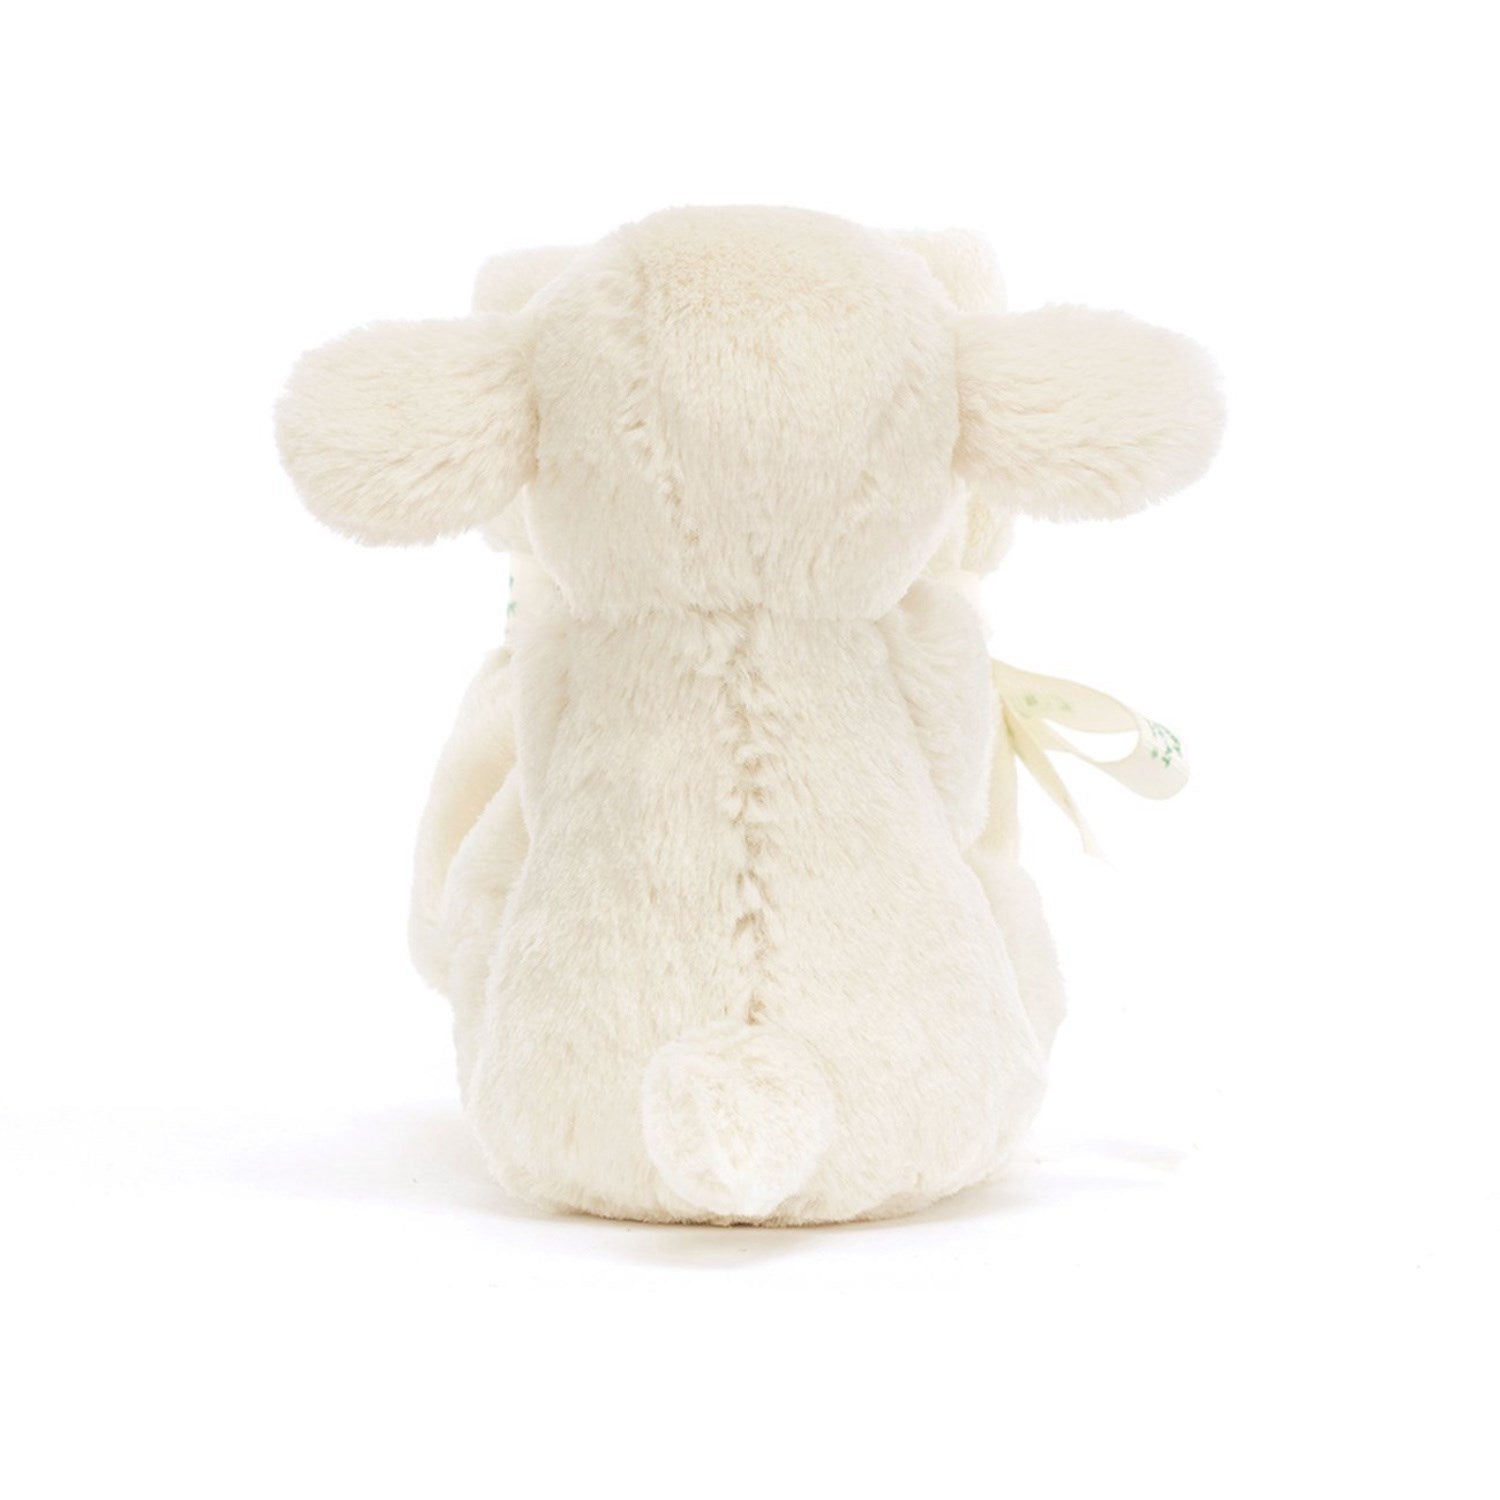 Jellycat Bashful Lamb Soother 5